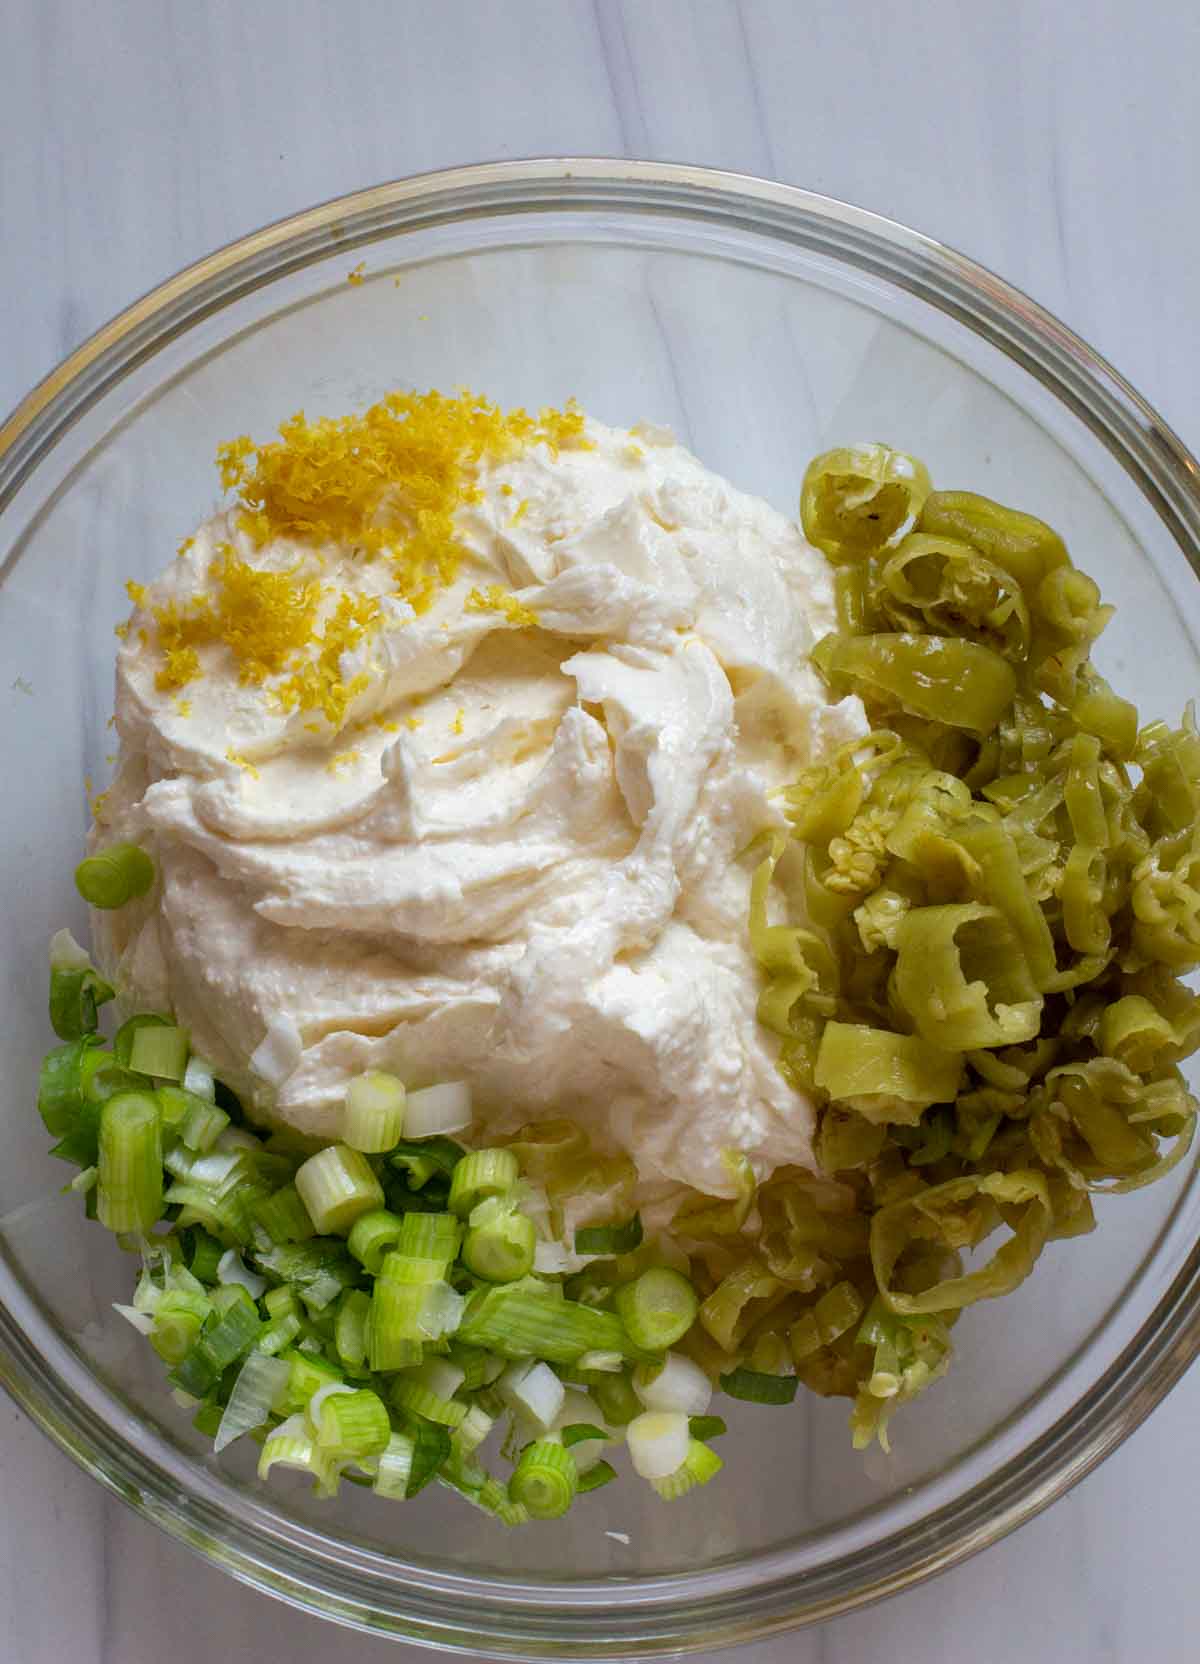 Adding vegetables to cream cheese and feta cheese.